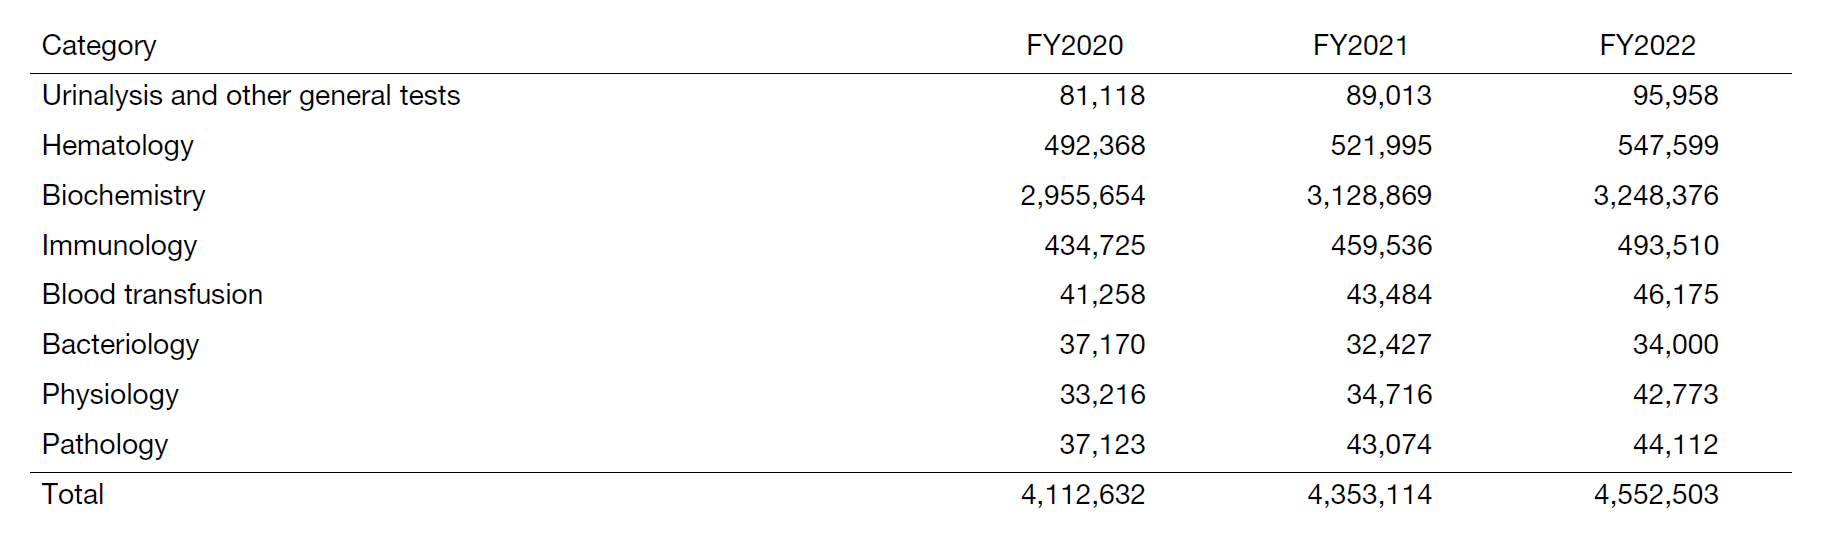 Table 1. Number of clinical tests performed in FY2022